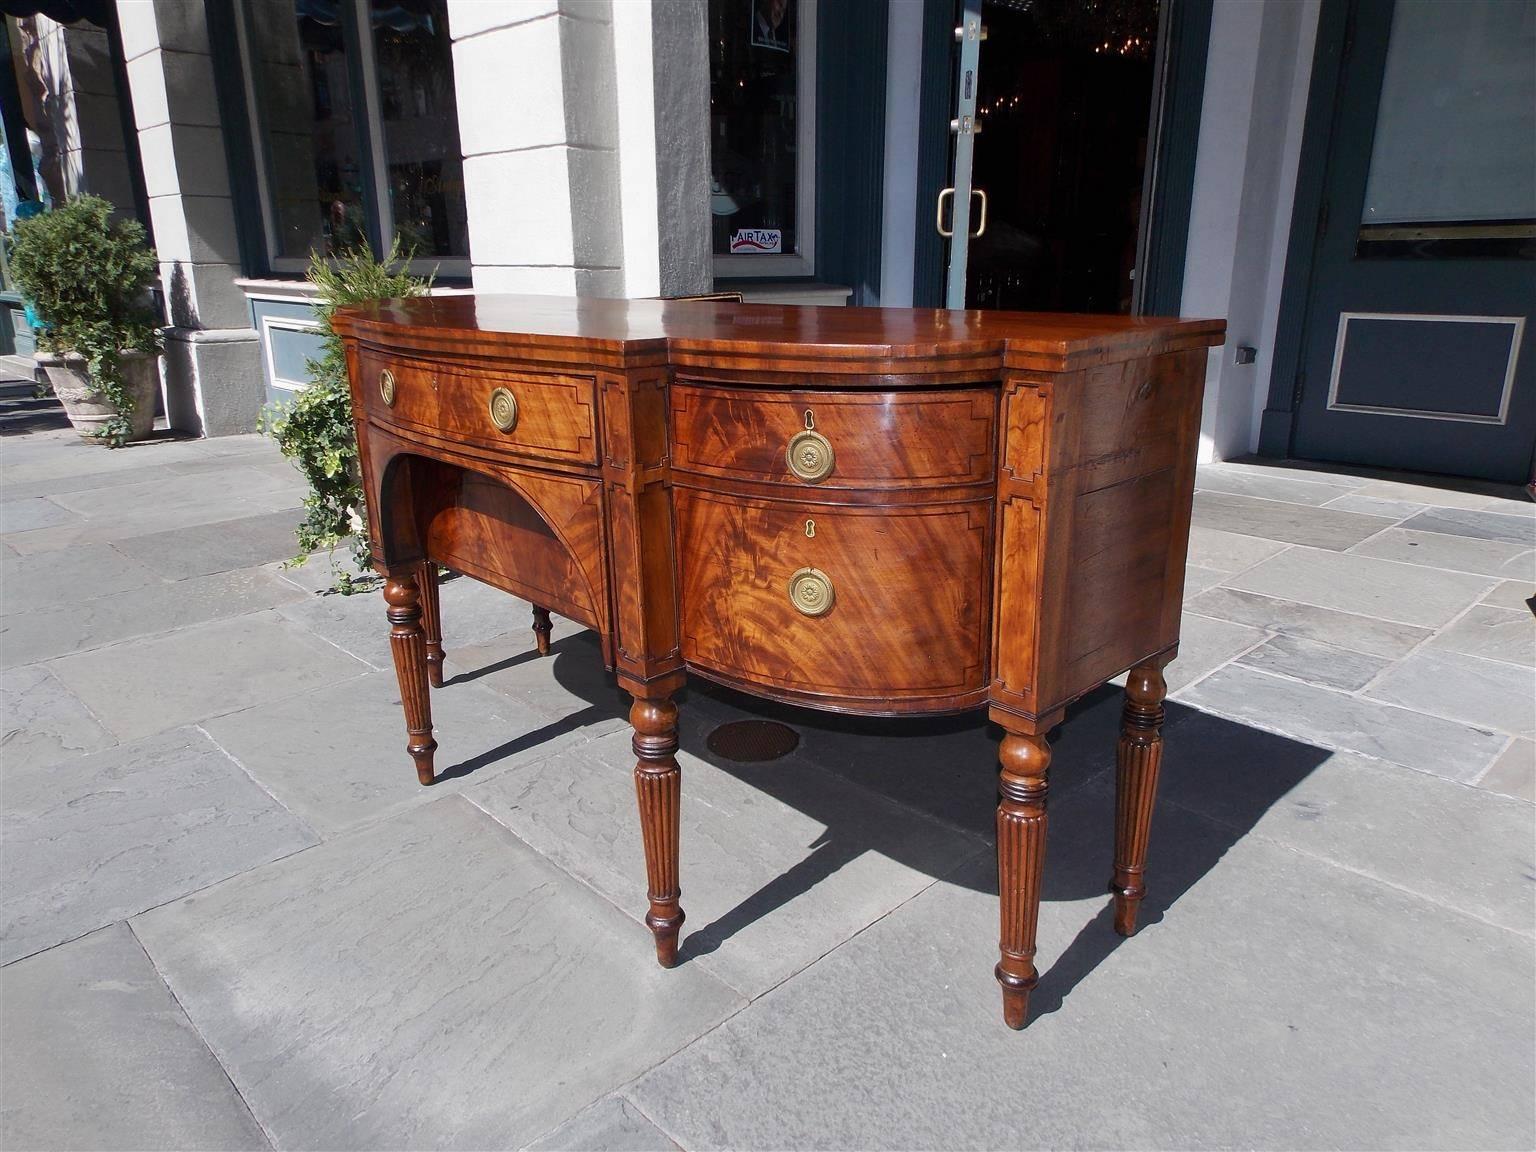 English Regency Mahogany Bow Front Ebony Inlaid Sideboard, Circa 1800 In Excellent Condition For Sale In Hollywood, SC